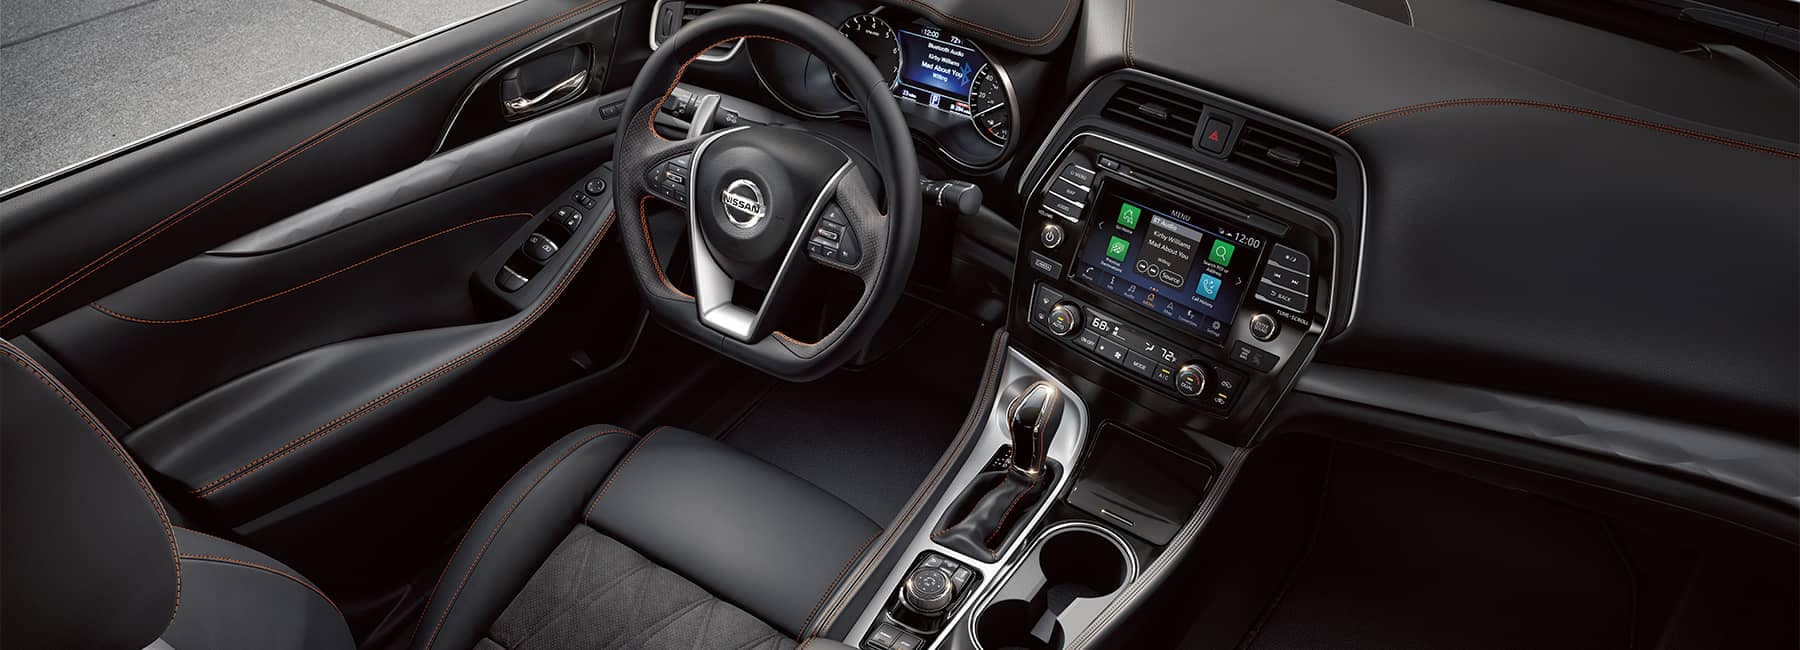 The black leather driver's seat and dashboard of a 2021 Nissan Maxima